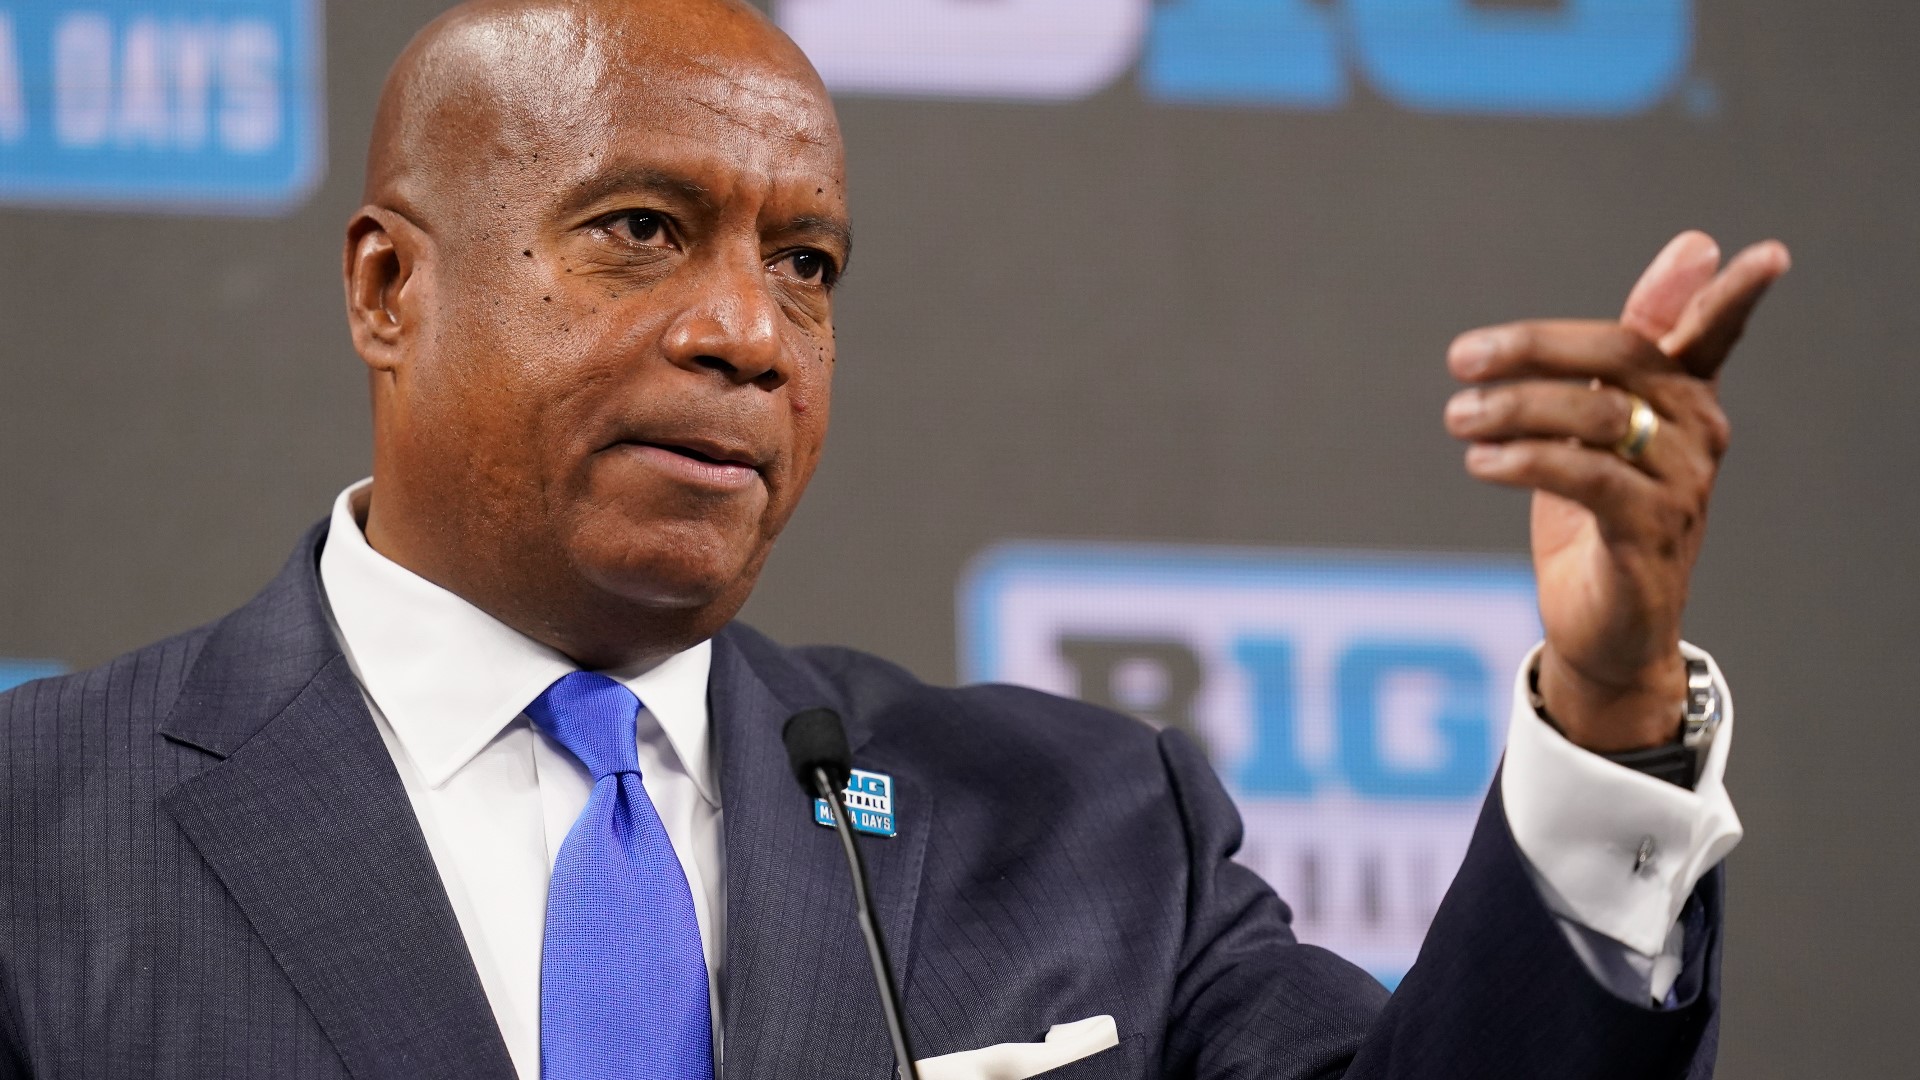 Big Ten Commissioner Kevin Warren talked Tuesday about the conference being bold and aggressive as college sports goes through a period of sweeping change.